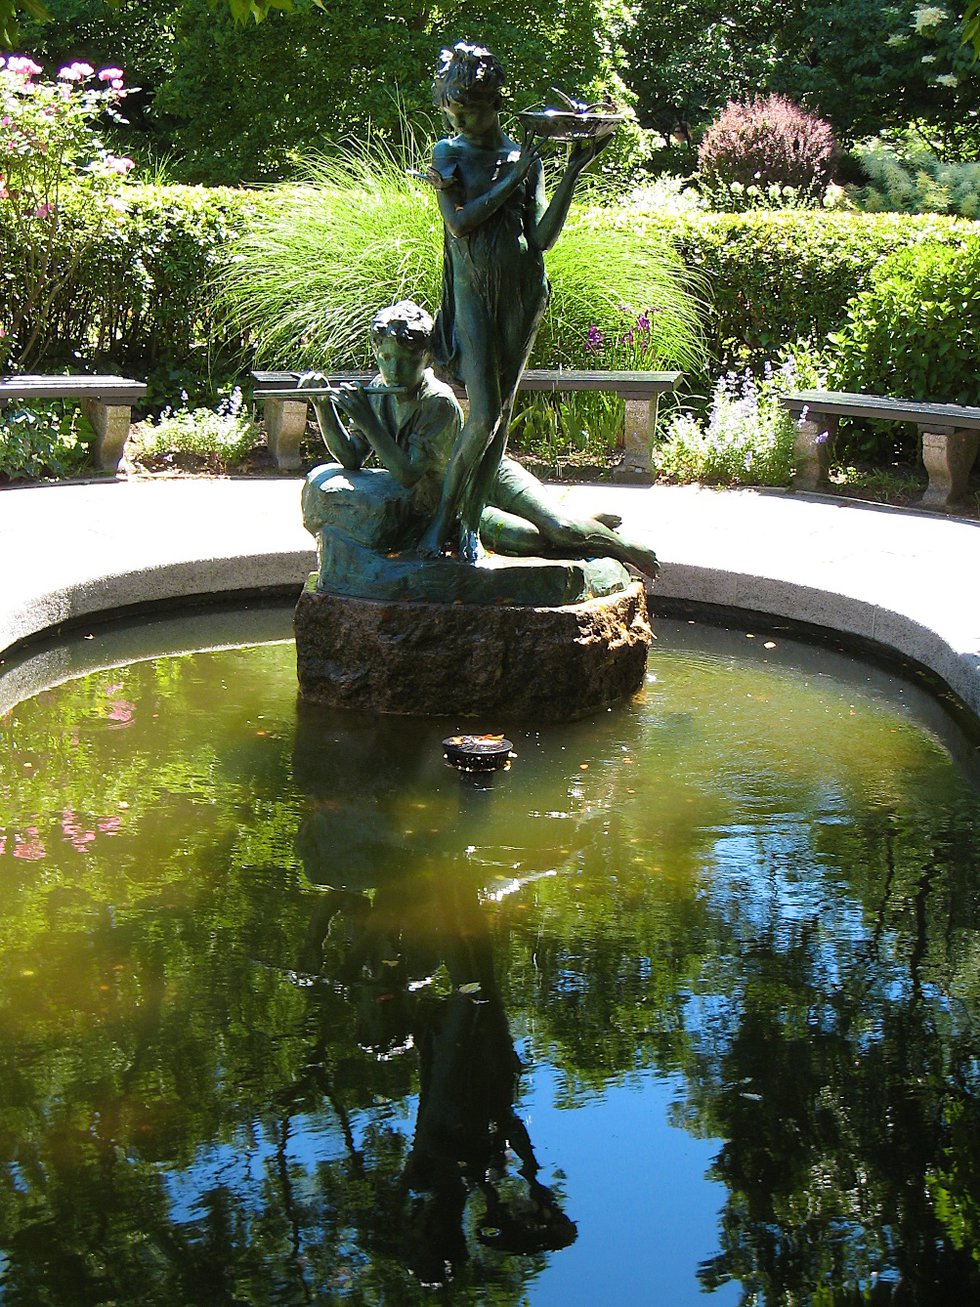 Serenity of the Conservatory Garden